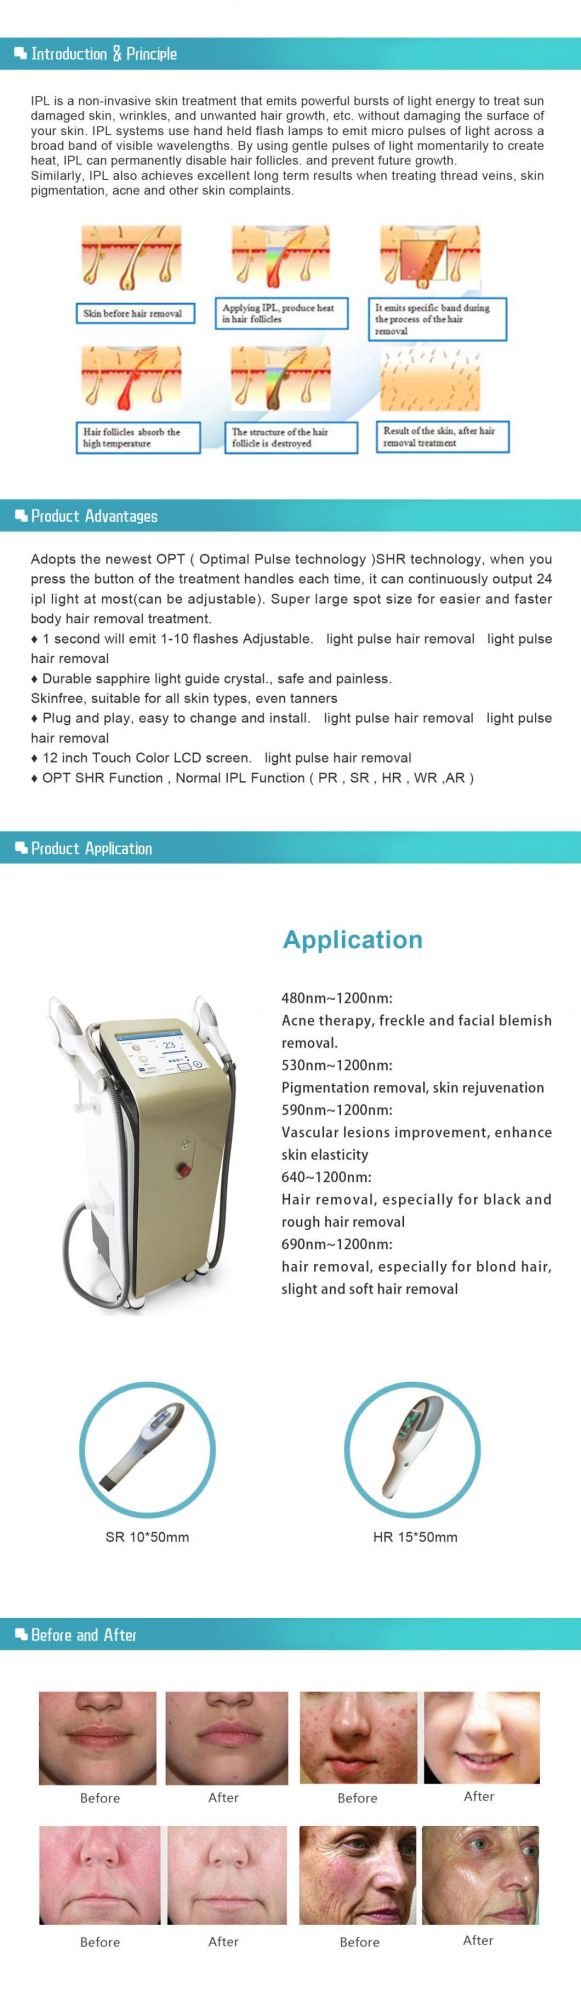 Vertical Two Handles Opt Machine Fast Hair Removal Opt Shr